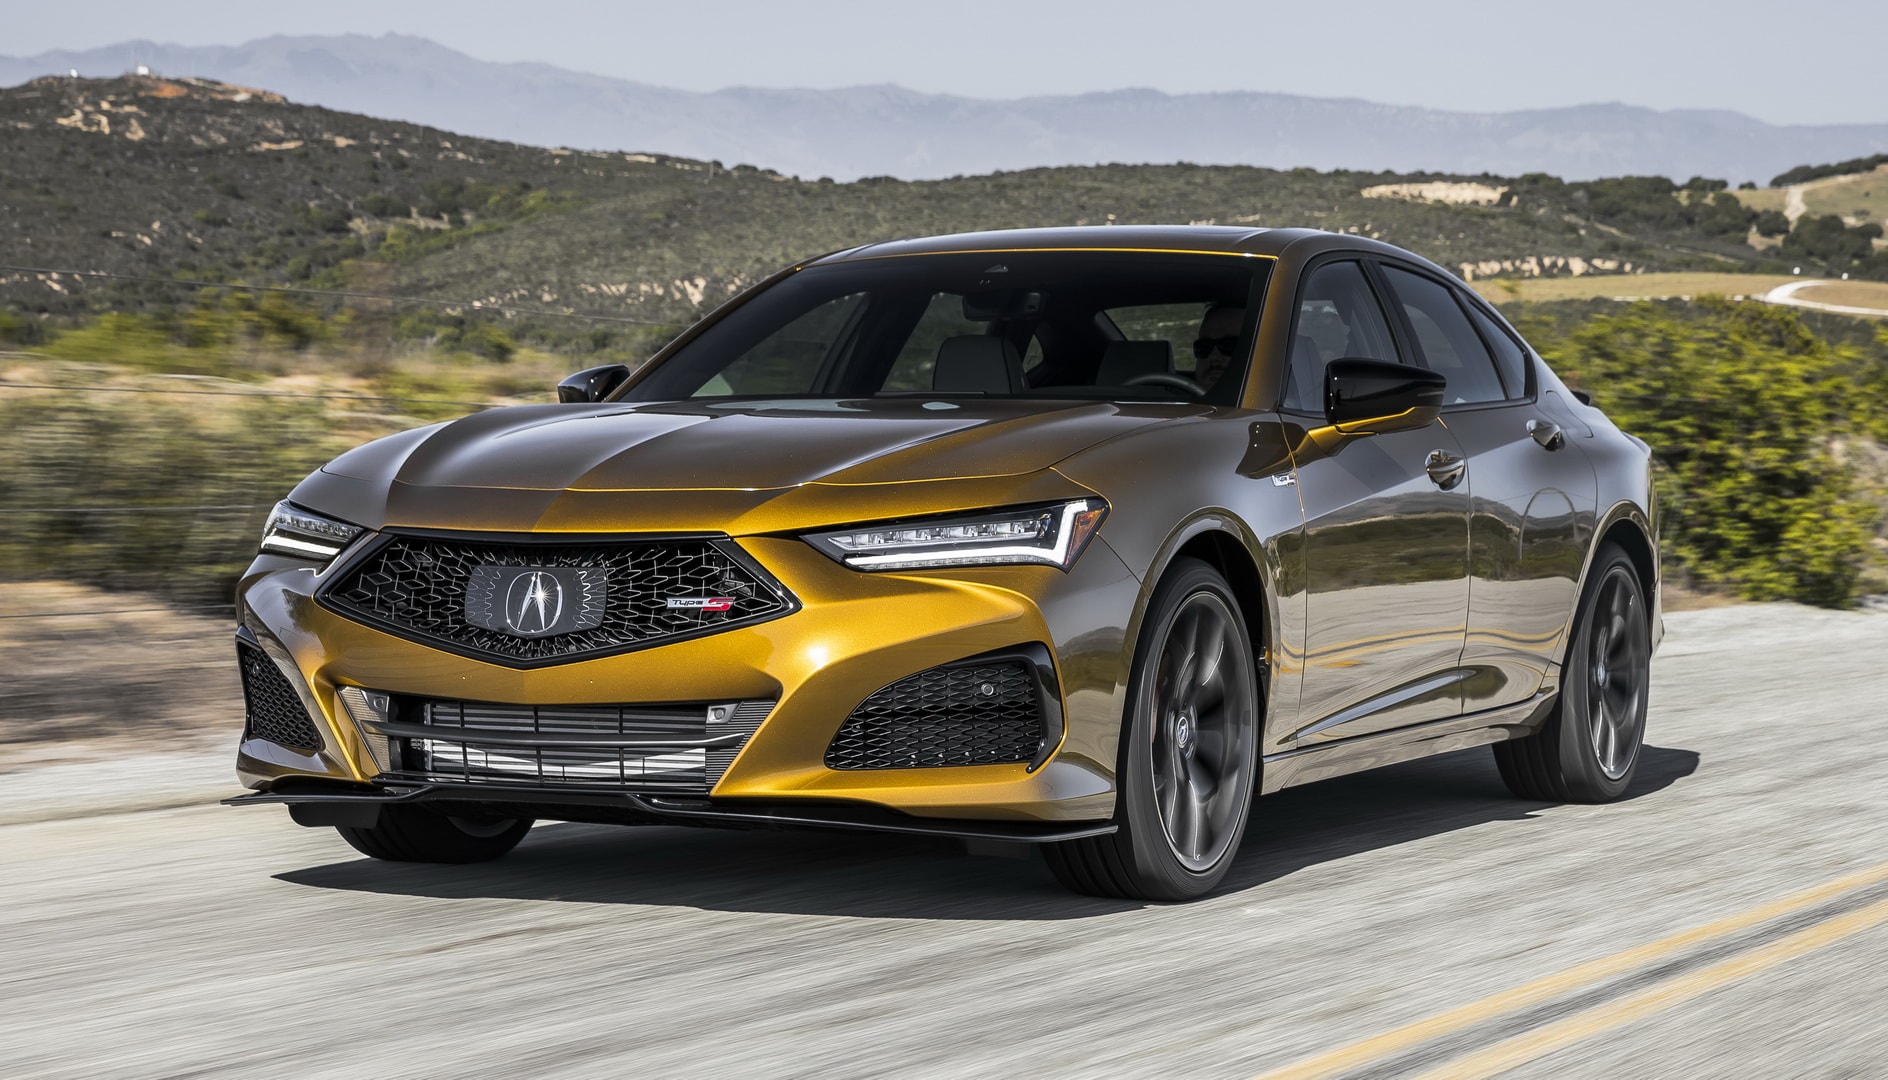 2021-acura-tlx-type-s-on-sale-june-23-from-52-300-costs-less-than-a